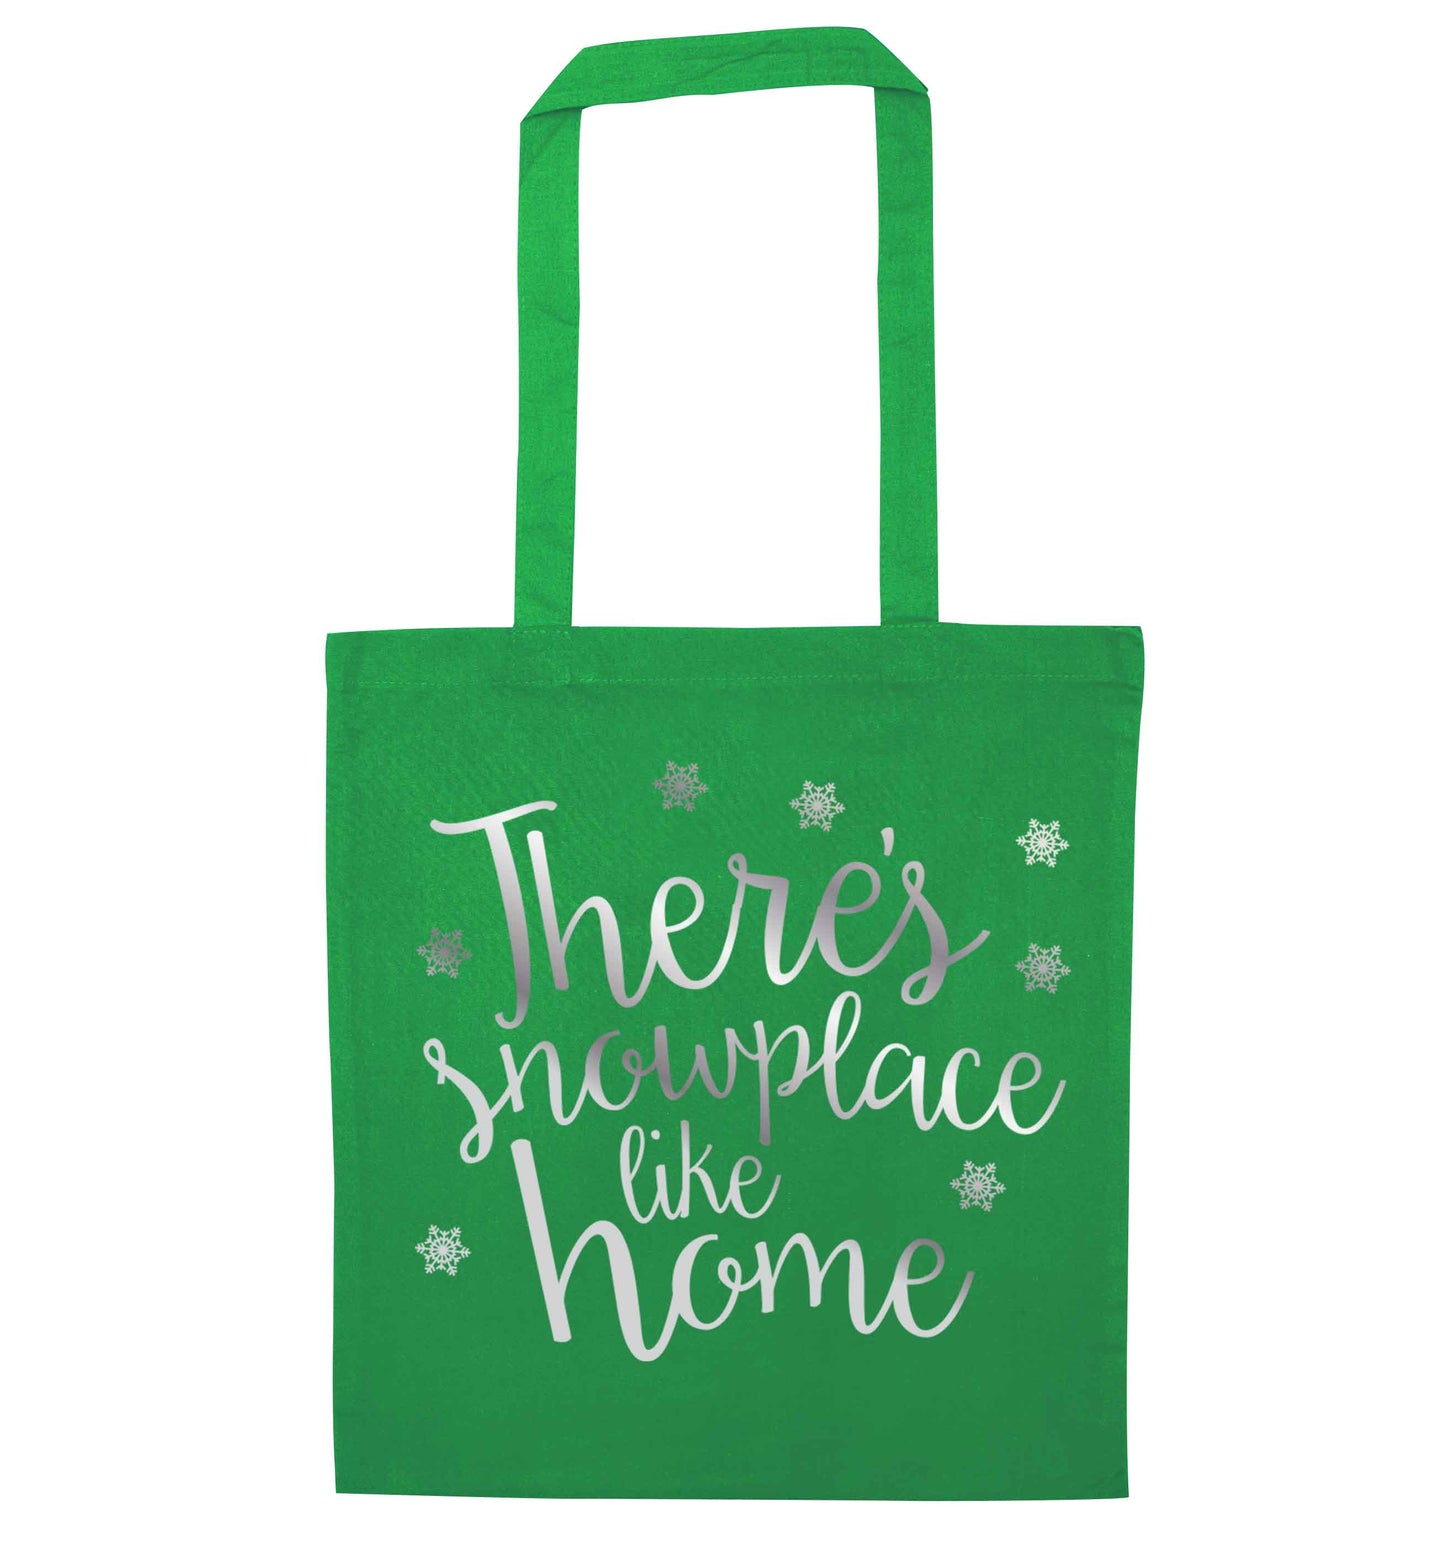 There's snowplace like home - metallic silver green tote bag